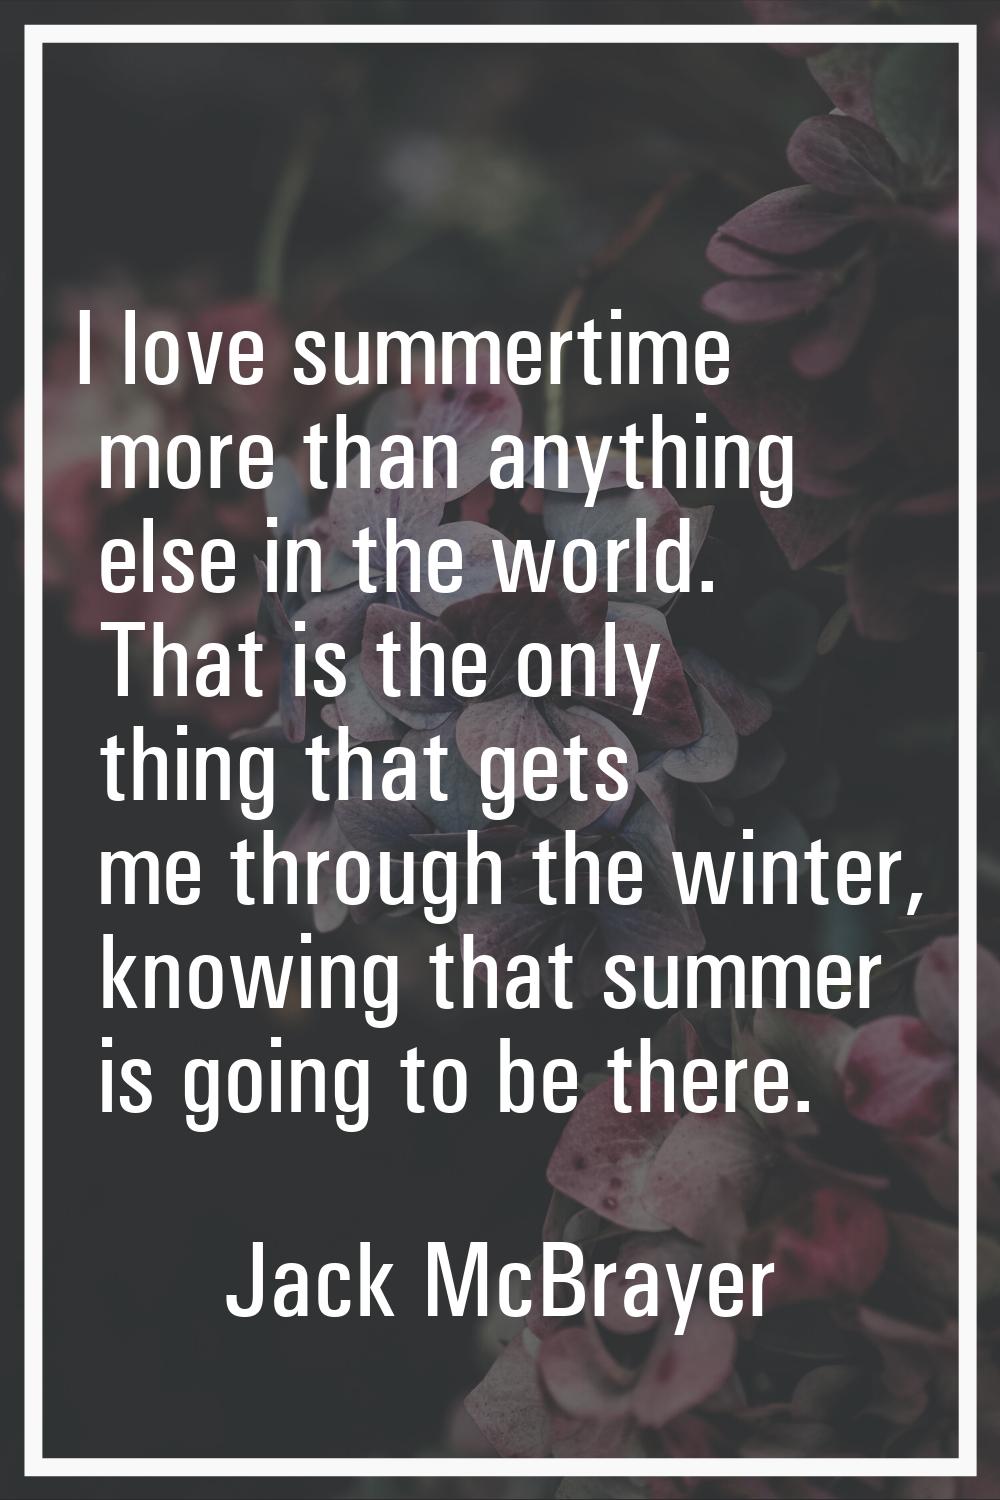 I love summertime more than anything else in the world. That is the only thing that gets me through